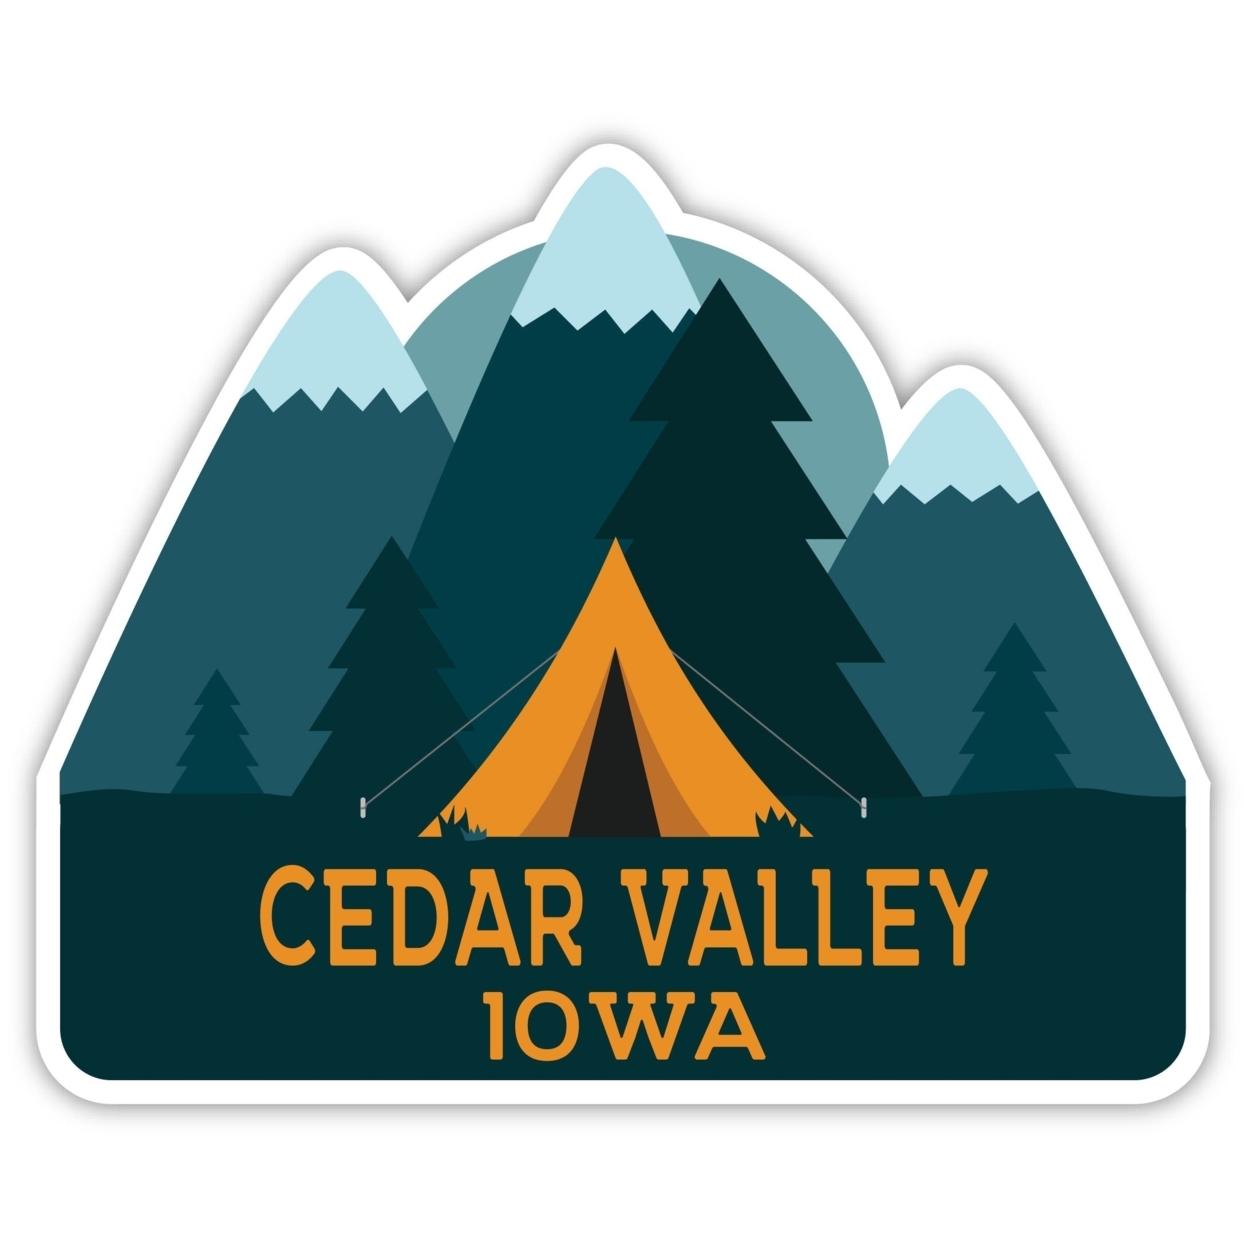 Cedar Valley Iowa Souvenir Decorative Stickers (Choose Theme And Size) - 4-Pack, 6-Inch, Tent